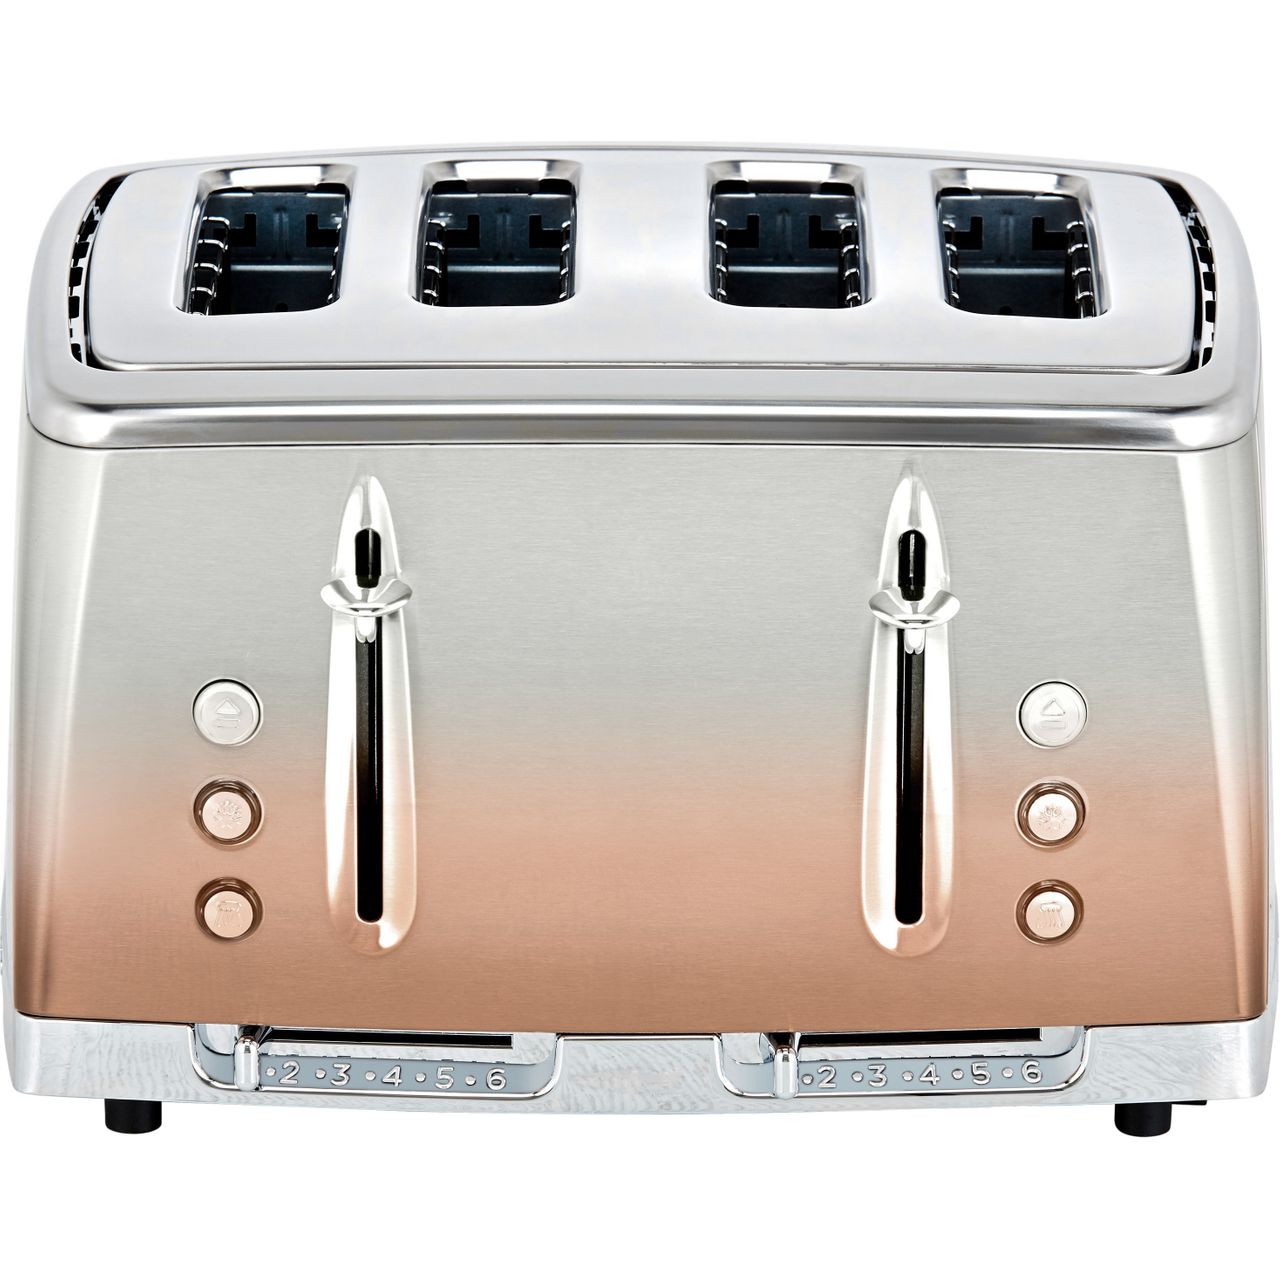 Russell Hobbs Eclipse 25143 4 Slice Toaster Review